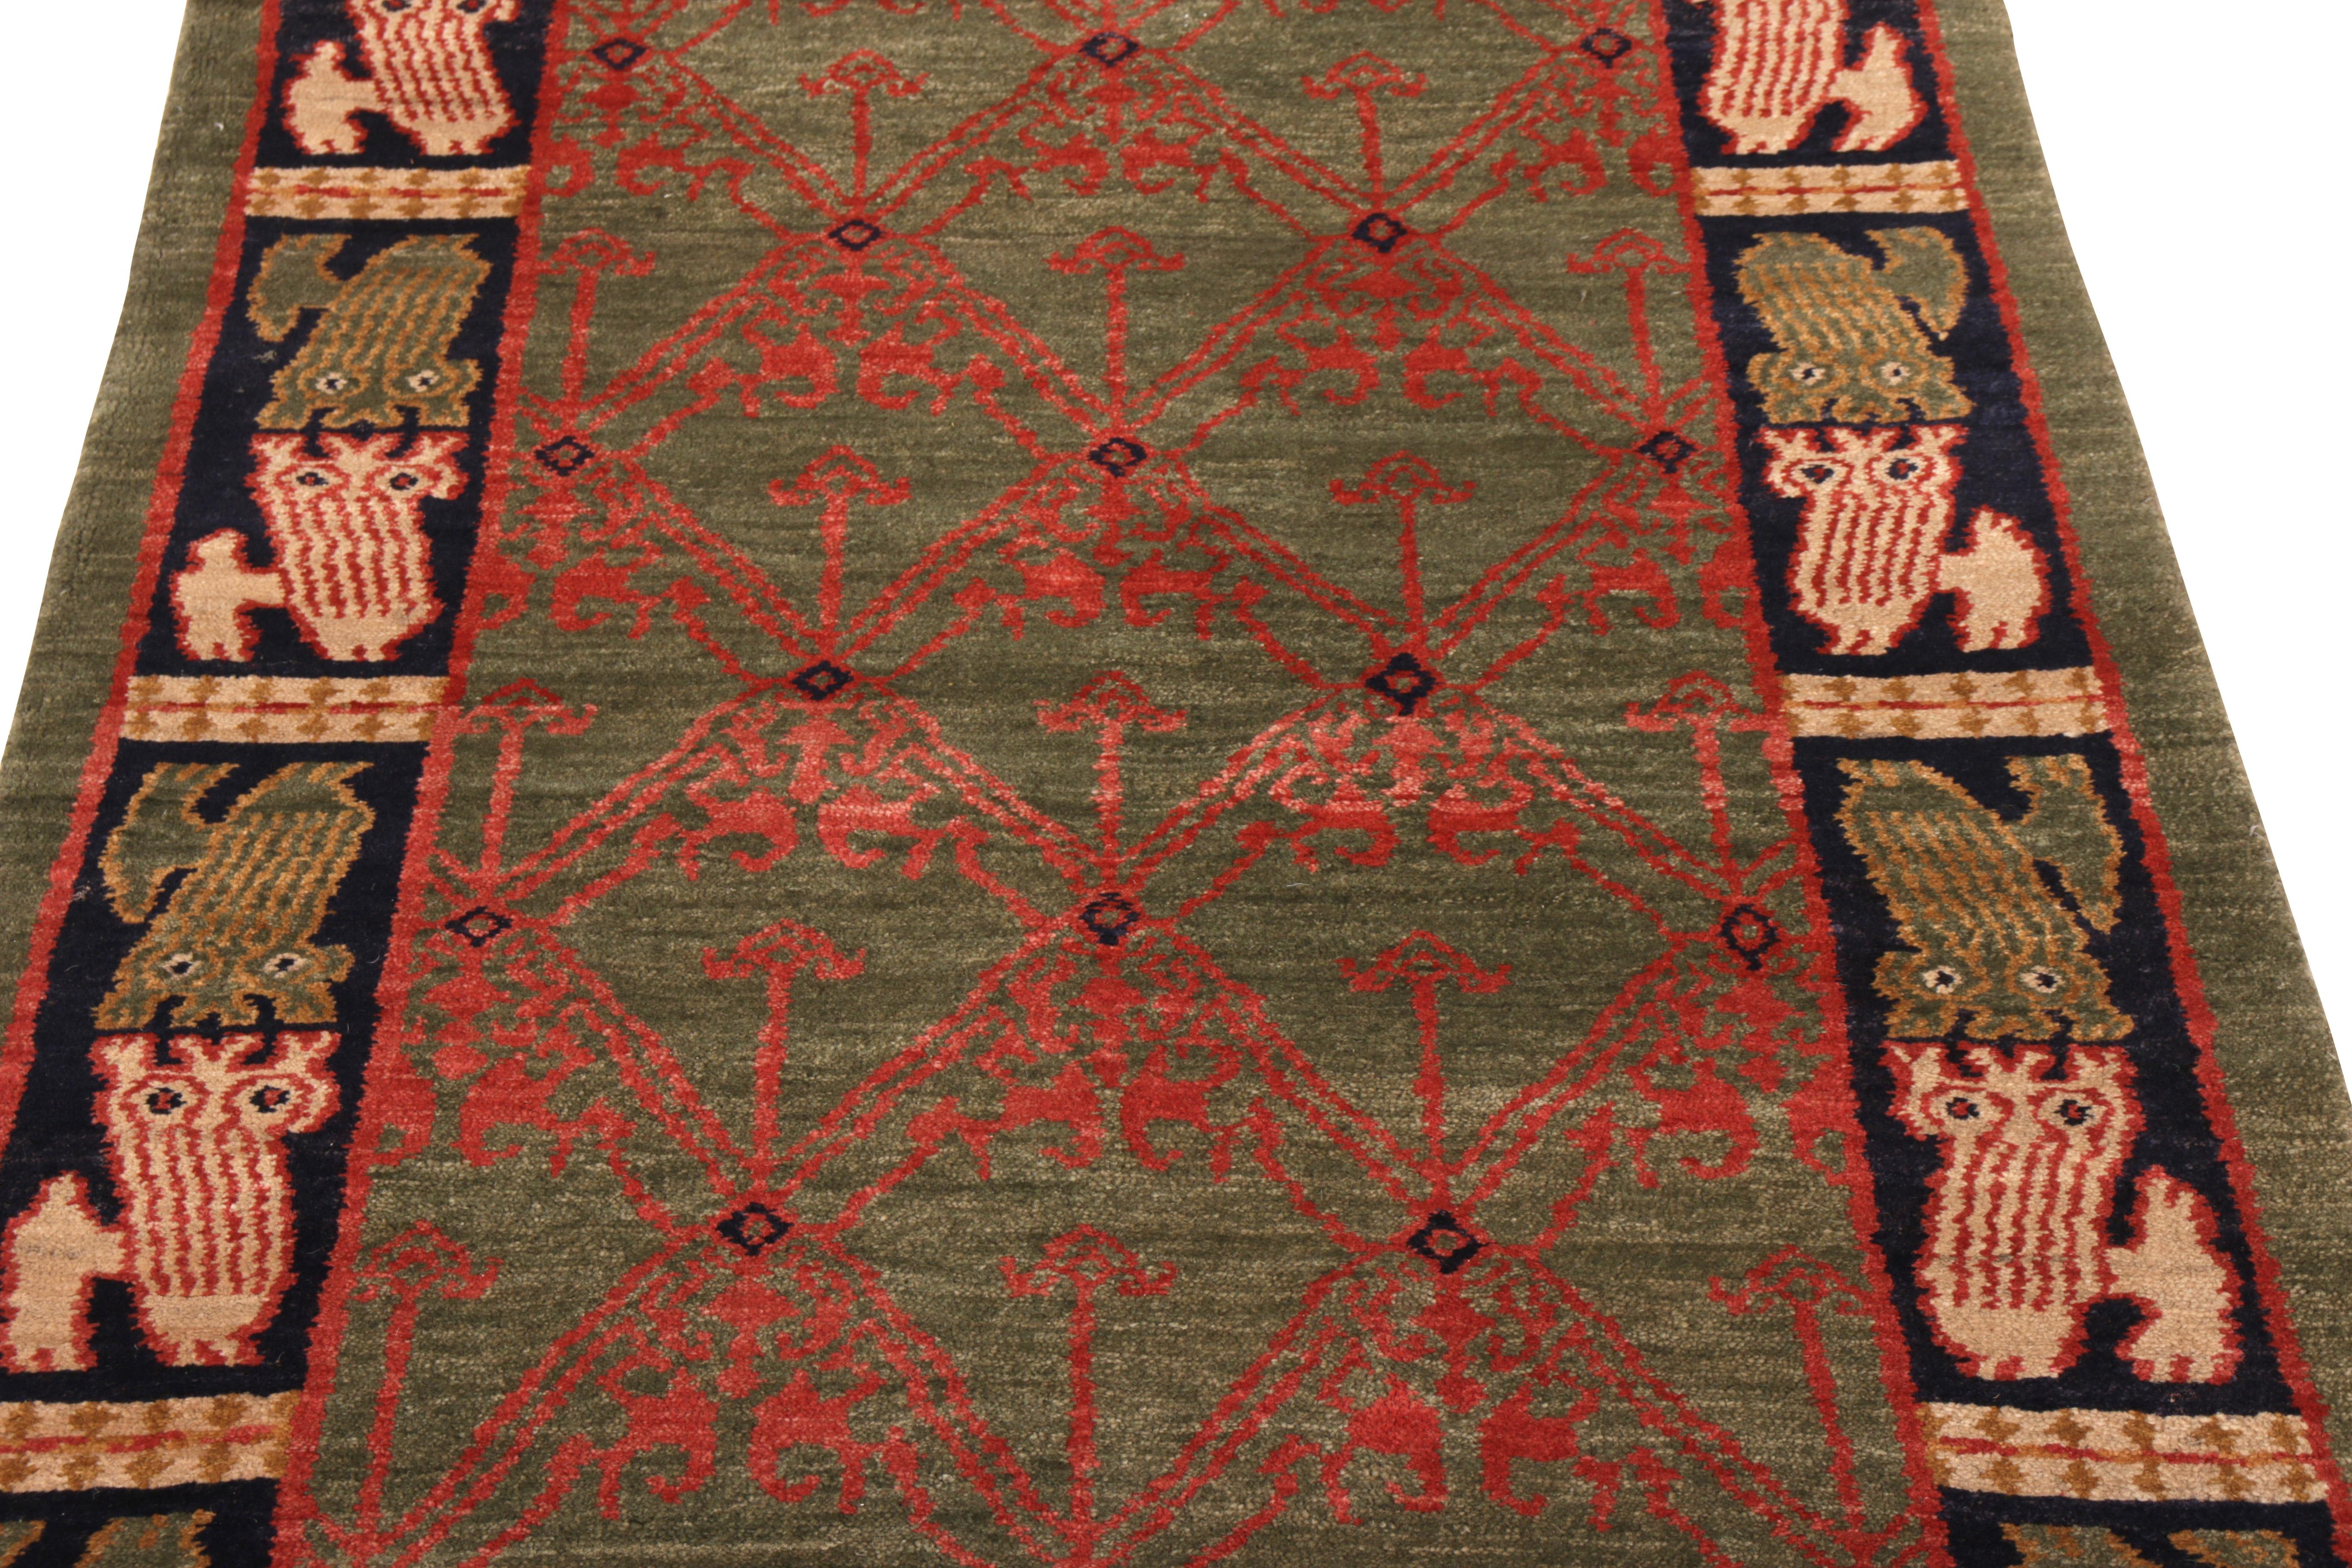 Spanish Colonial Rug & Kilim's Classic European-Style Runner Green Red Custom Rug Pattern For Sale